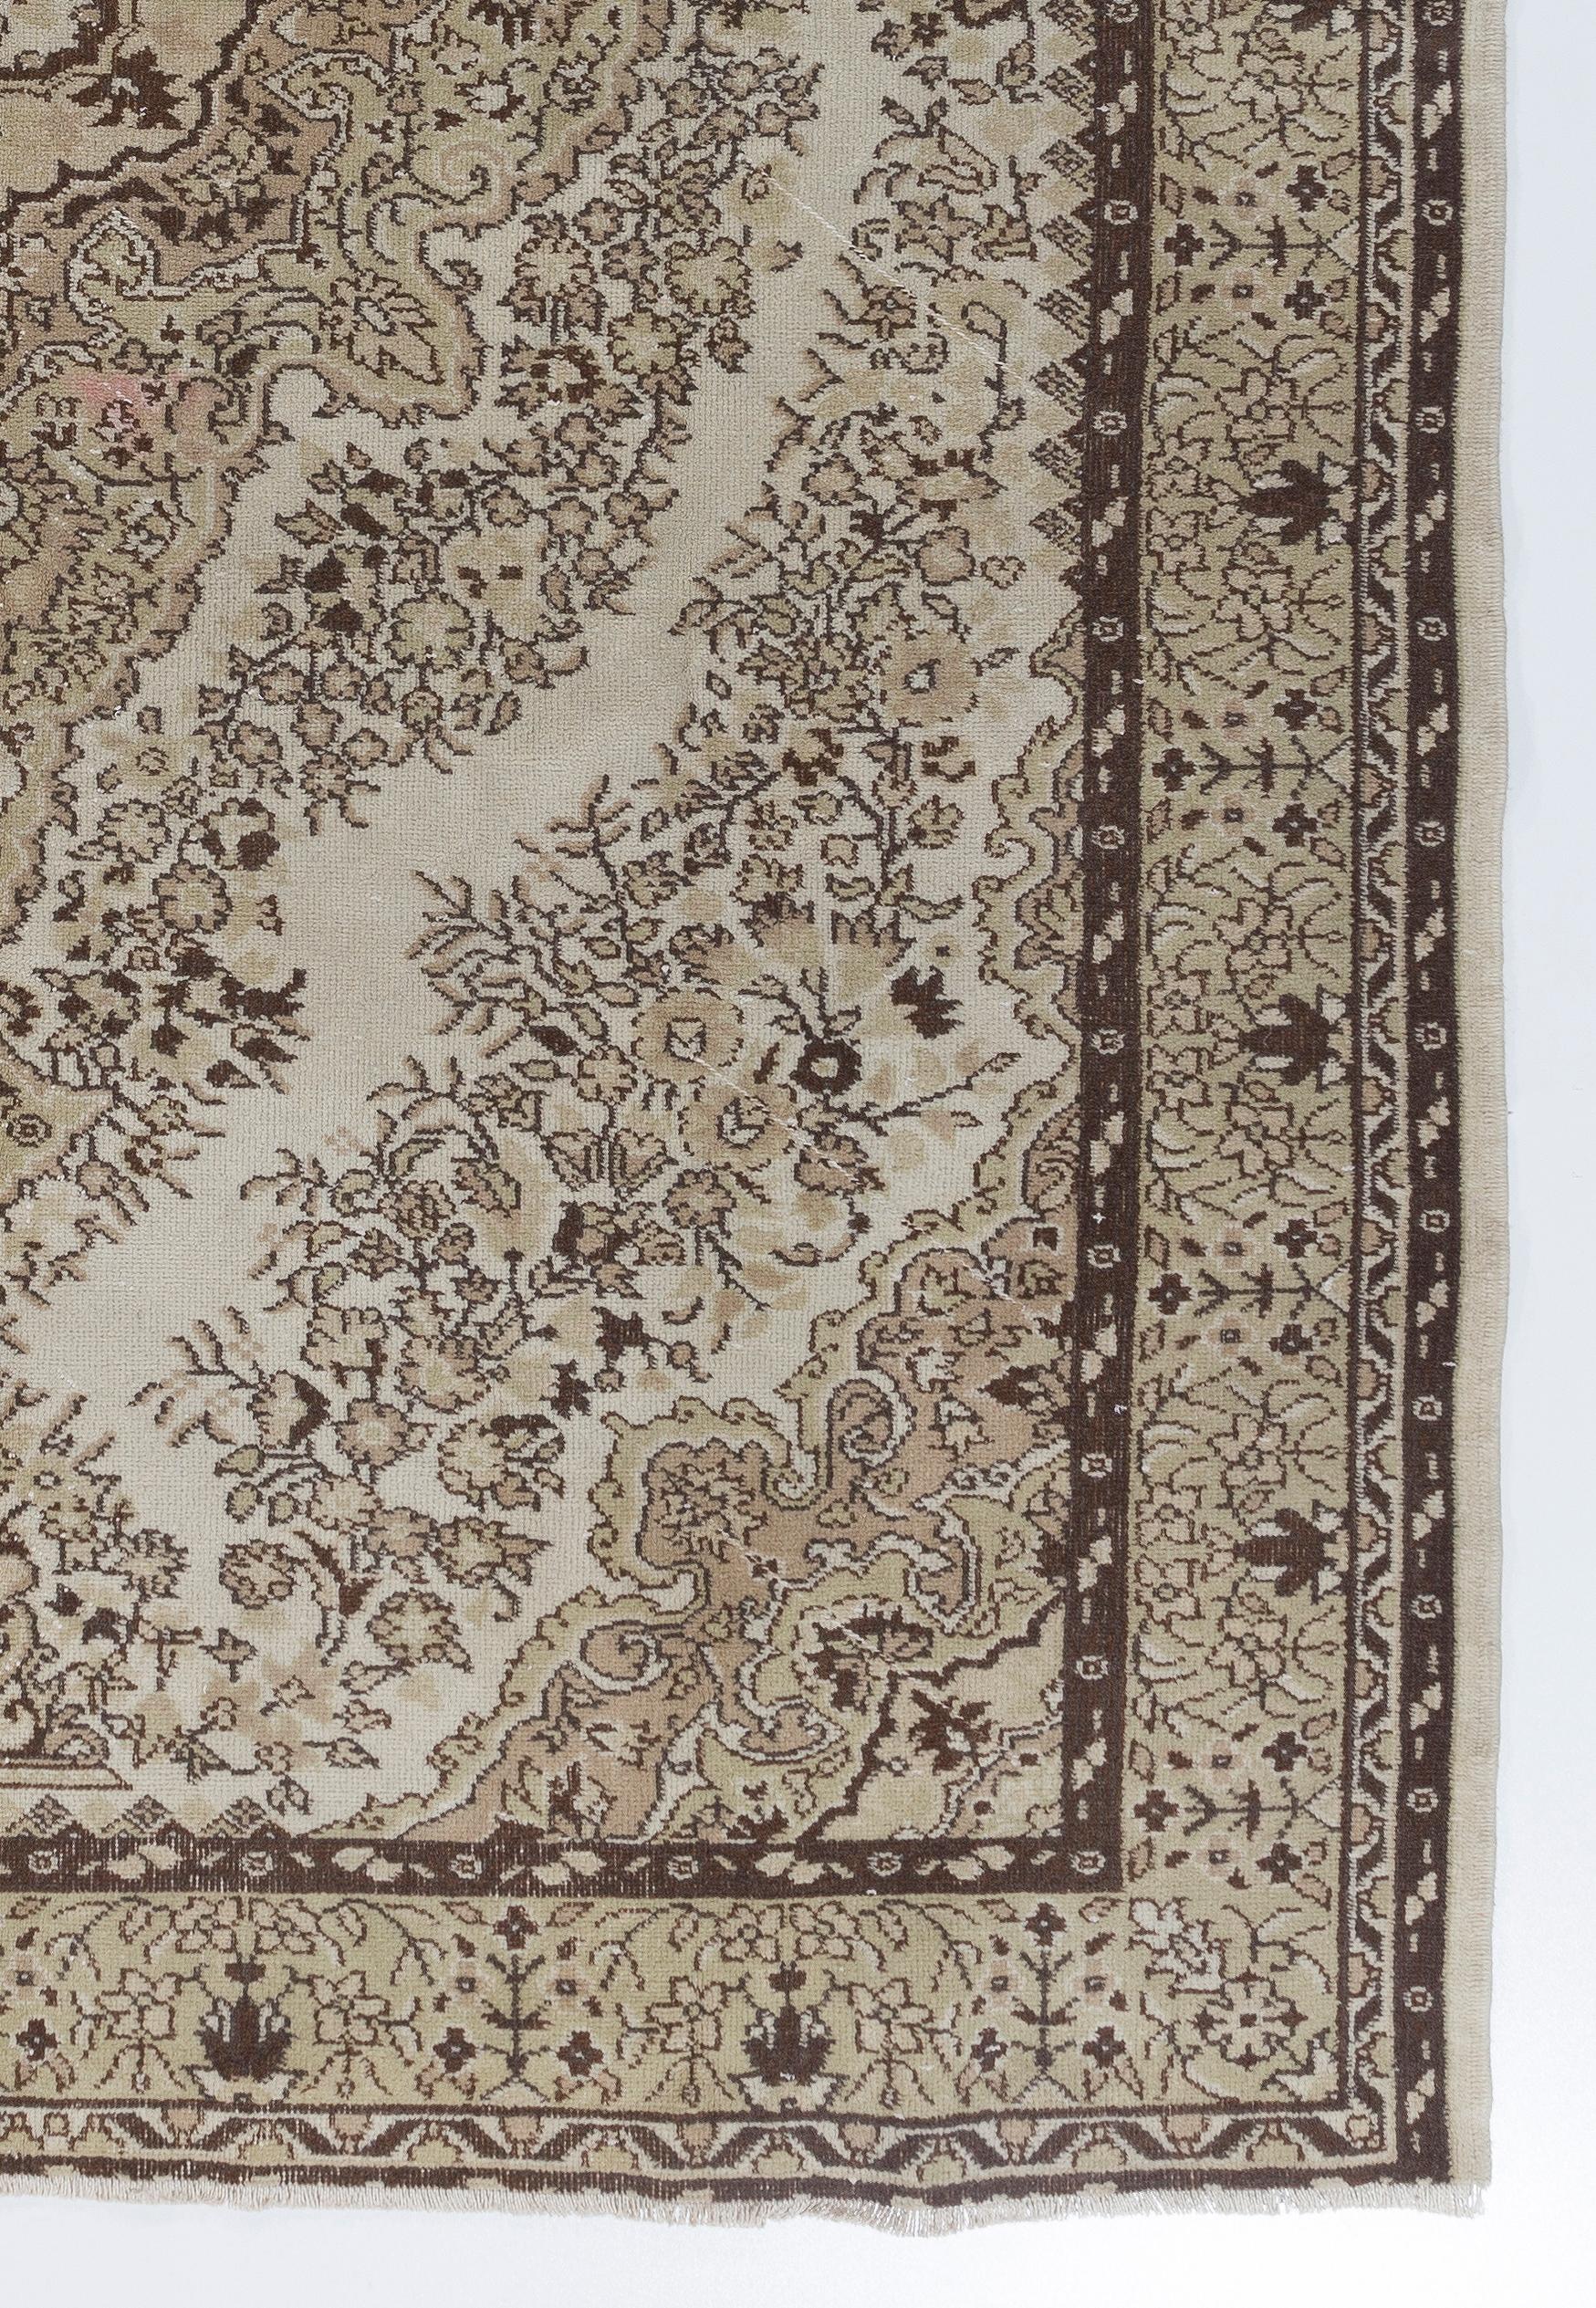 Hand-Knotted 7.3x10.5 Ft Handmade Vintage Floral Turkish Wool Area Rug in Neutral Tones For Sale